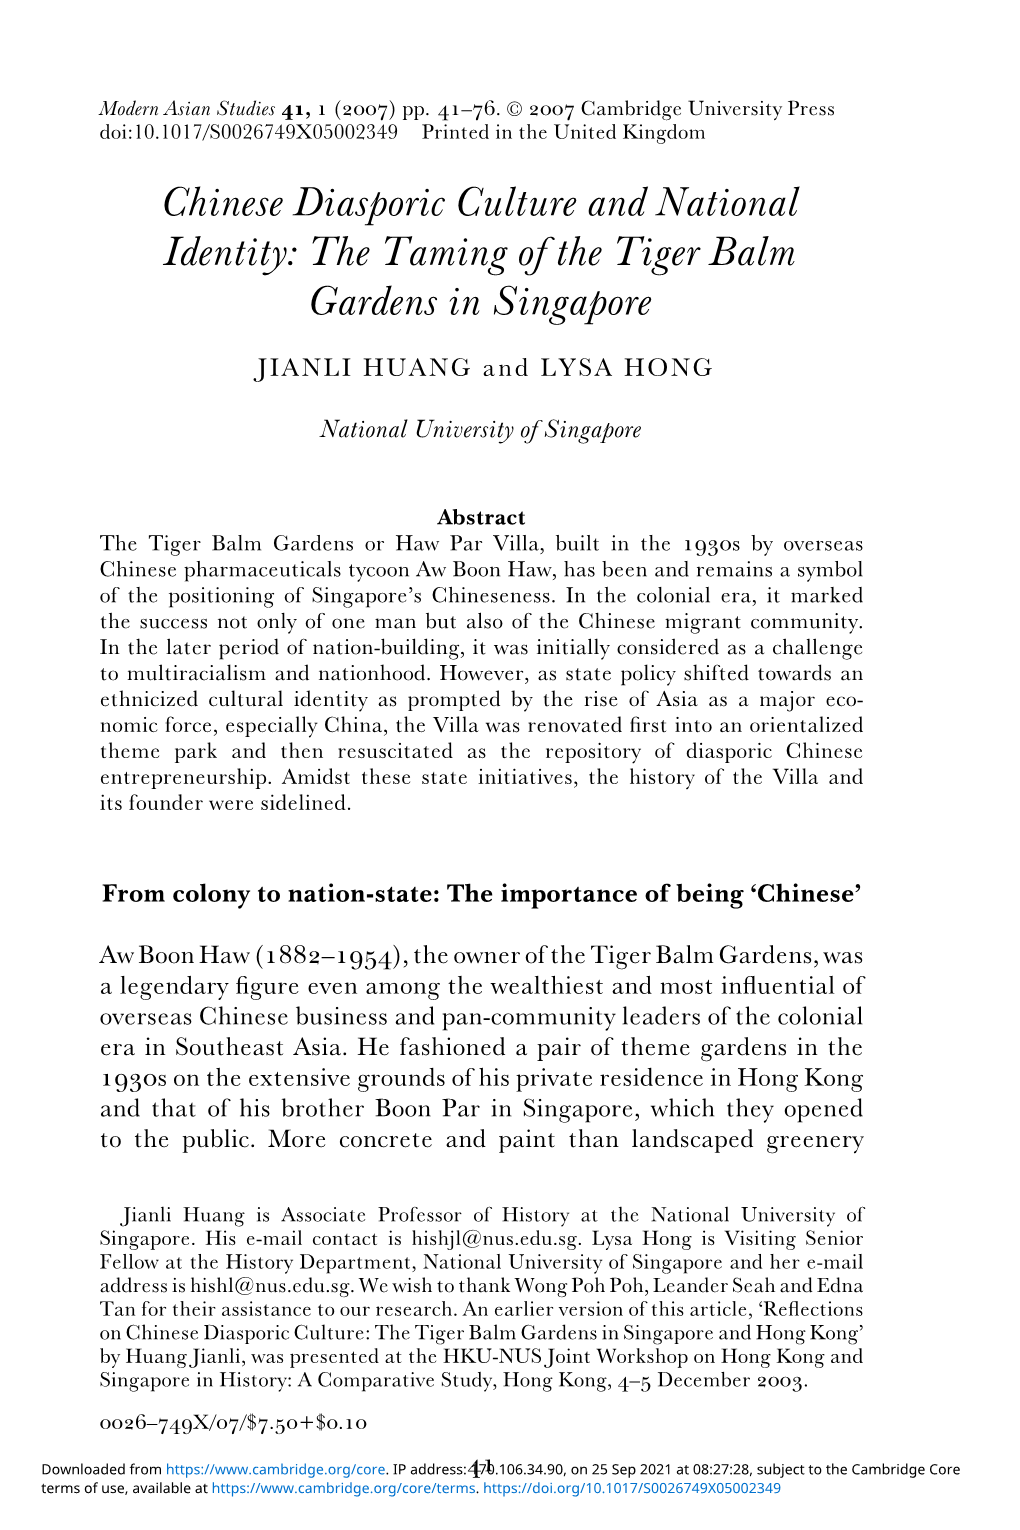 The Taming of the Tiger Balm Gardens in Singapore